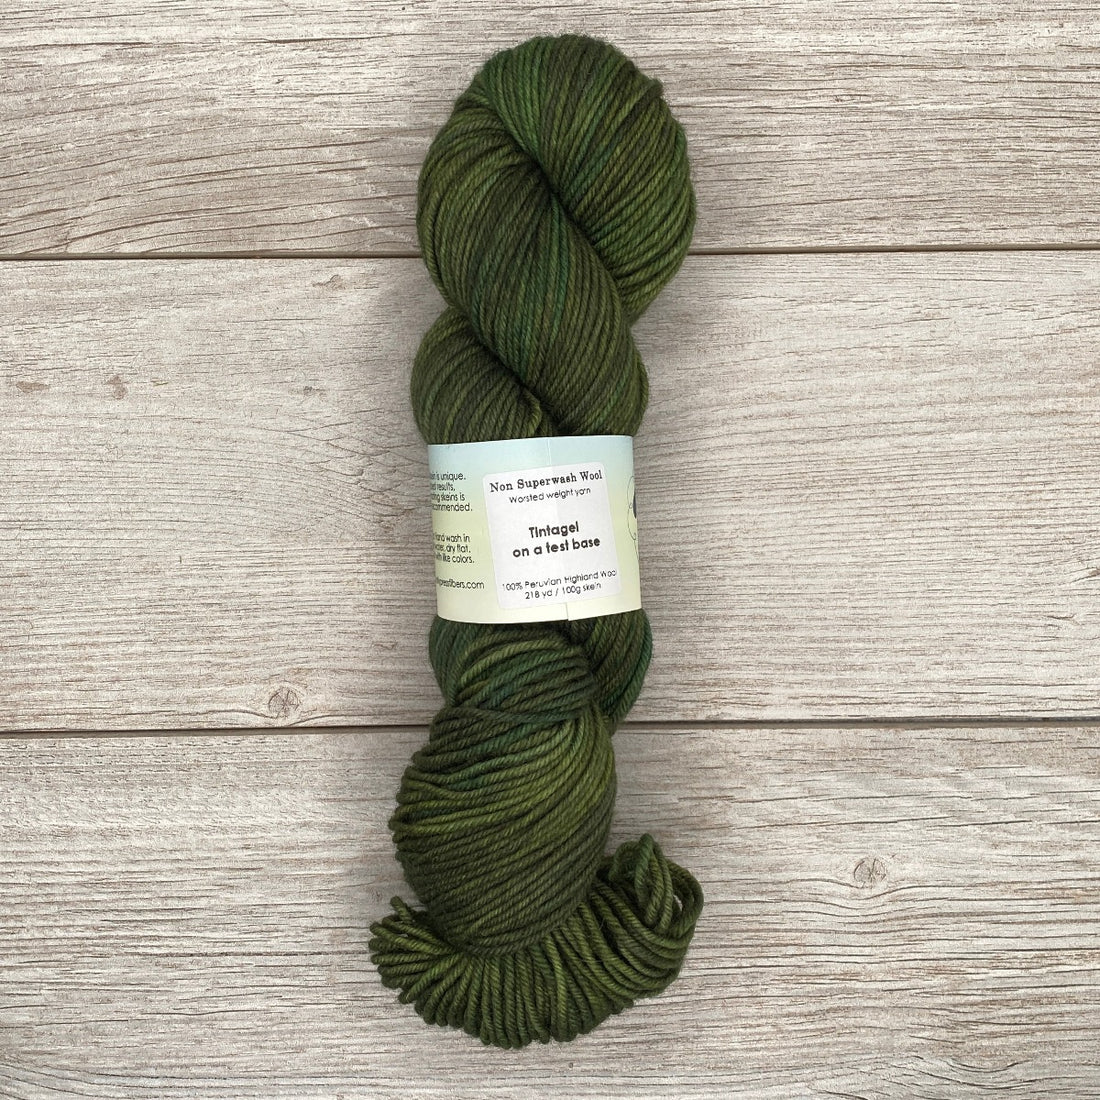 Tintagel  |  New Base Test   |  Peruvian Highland Wool  |  NSW worsted weight